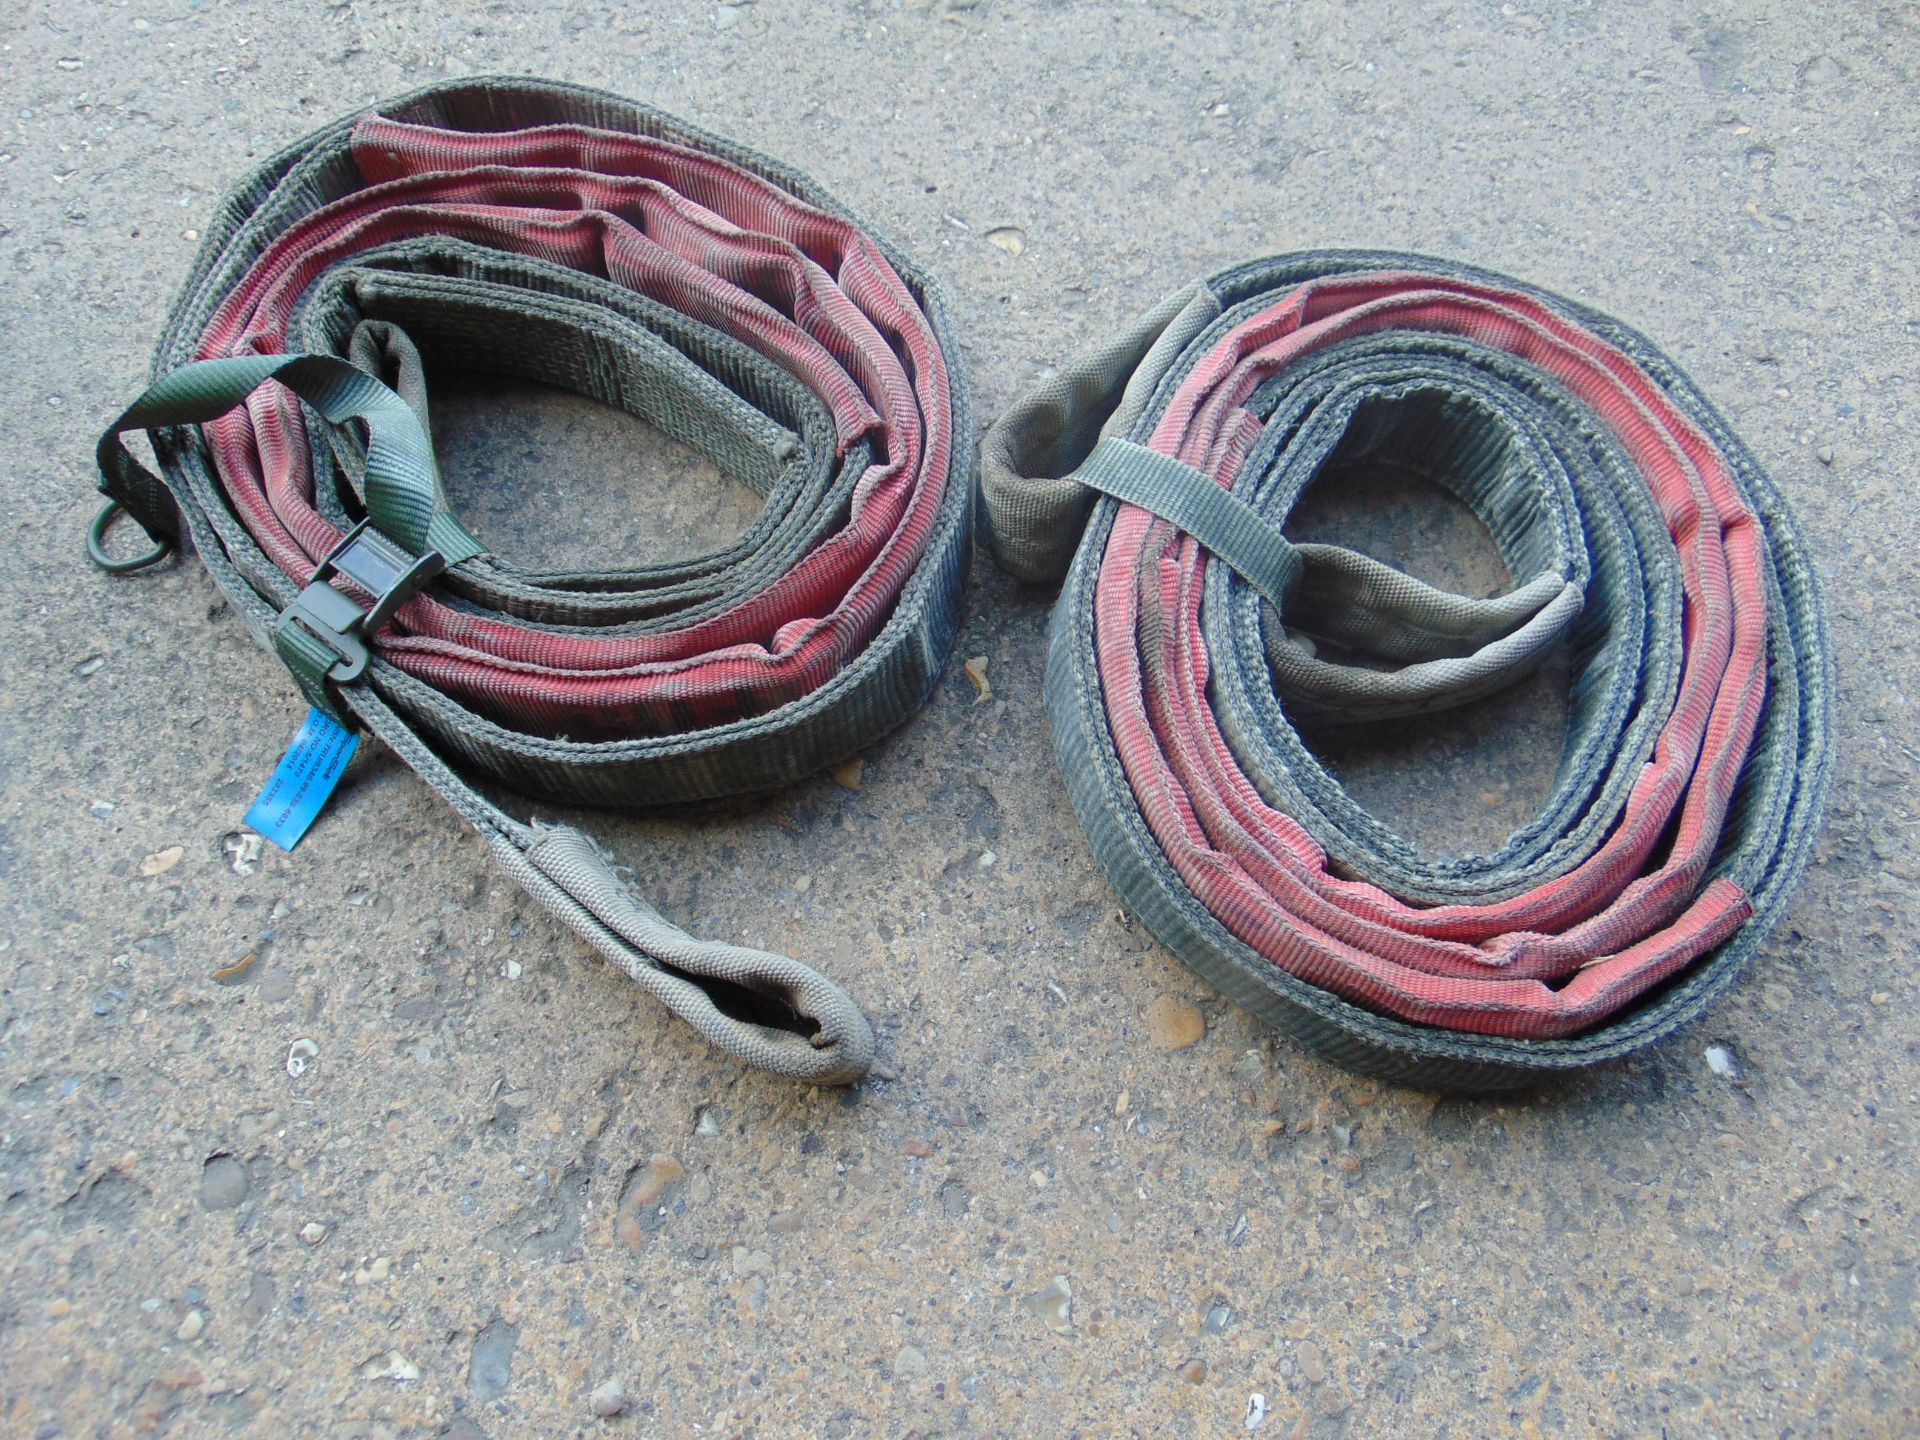 2 x LANDROVER WOLF TOW STROPS WITH WEBBING STRAP - Image 2 of 3